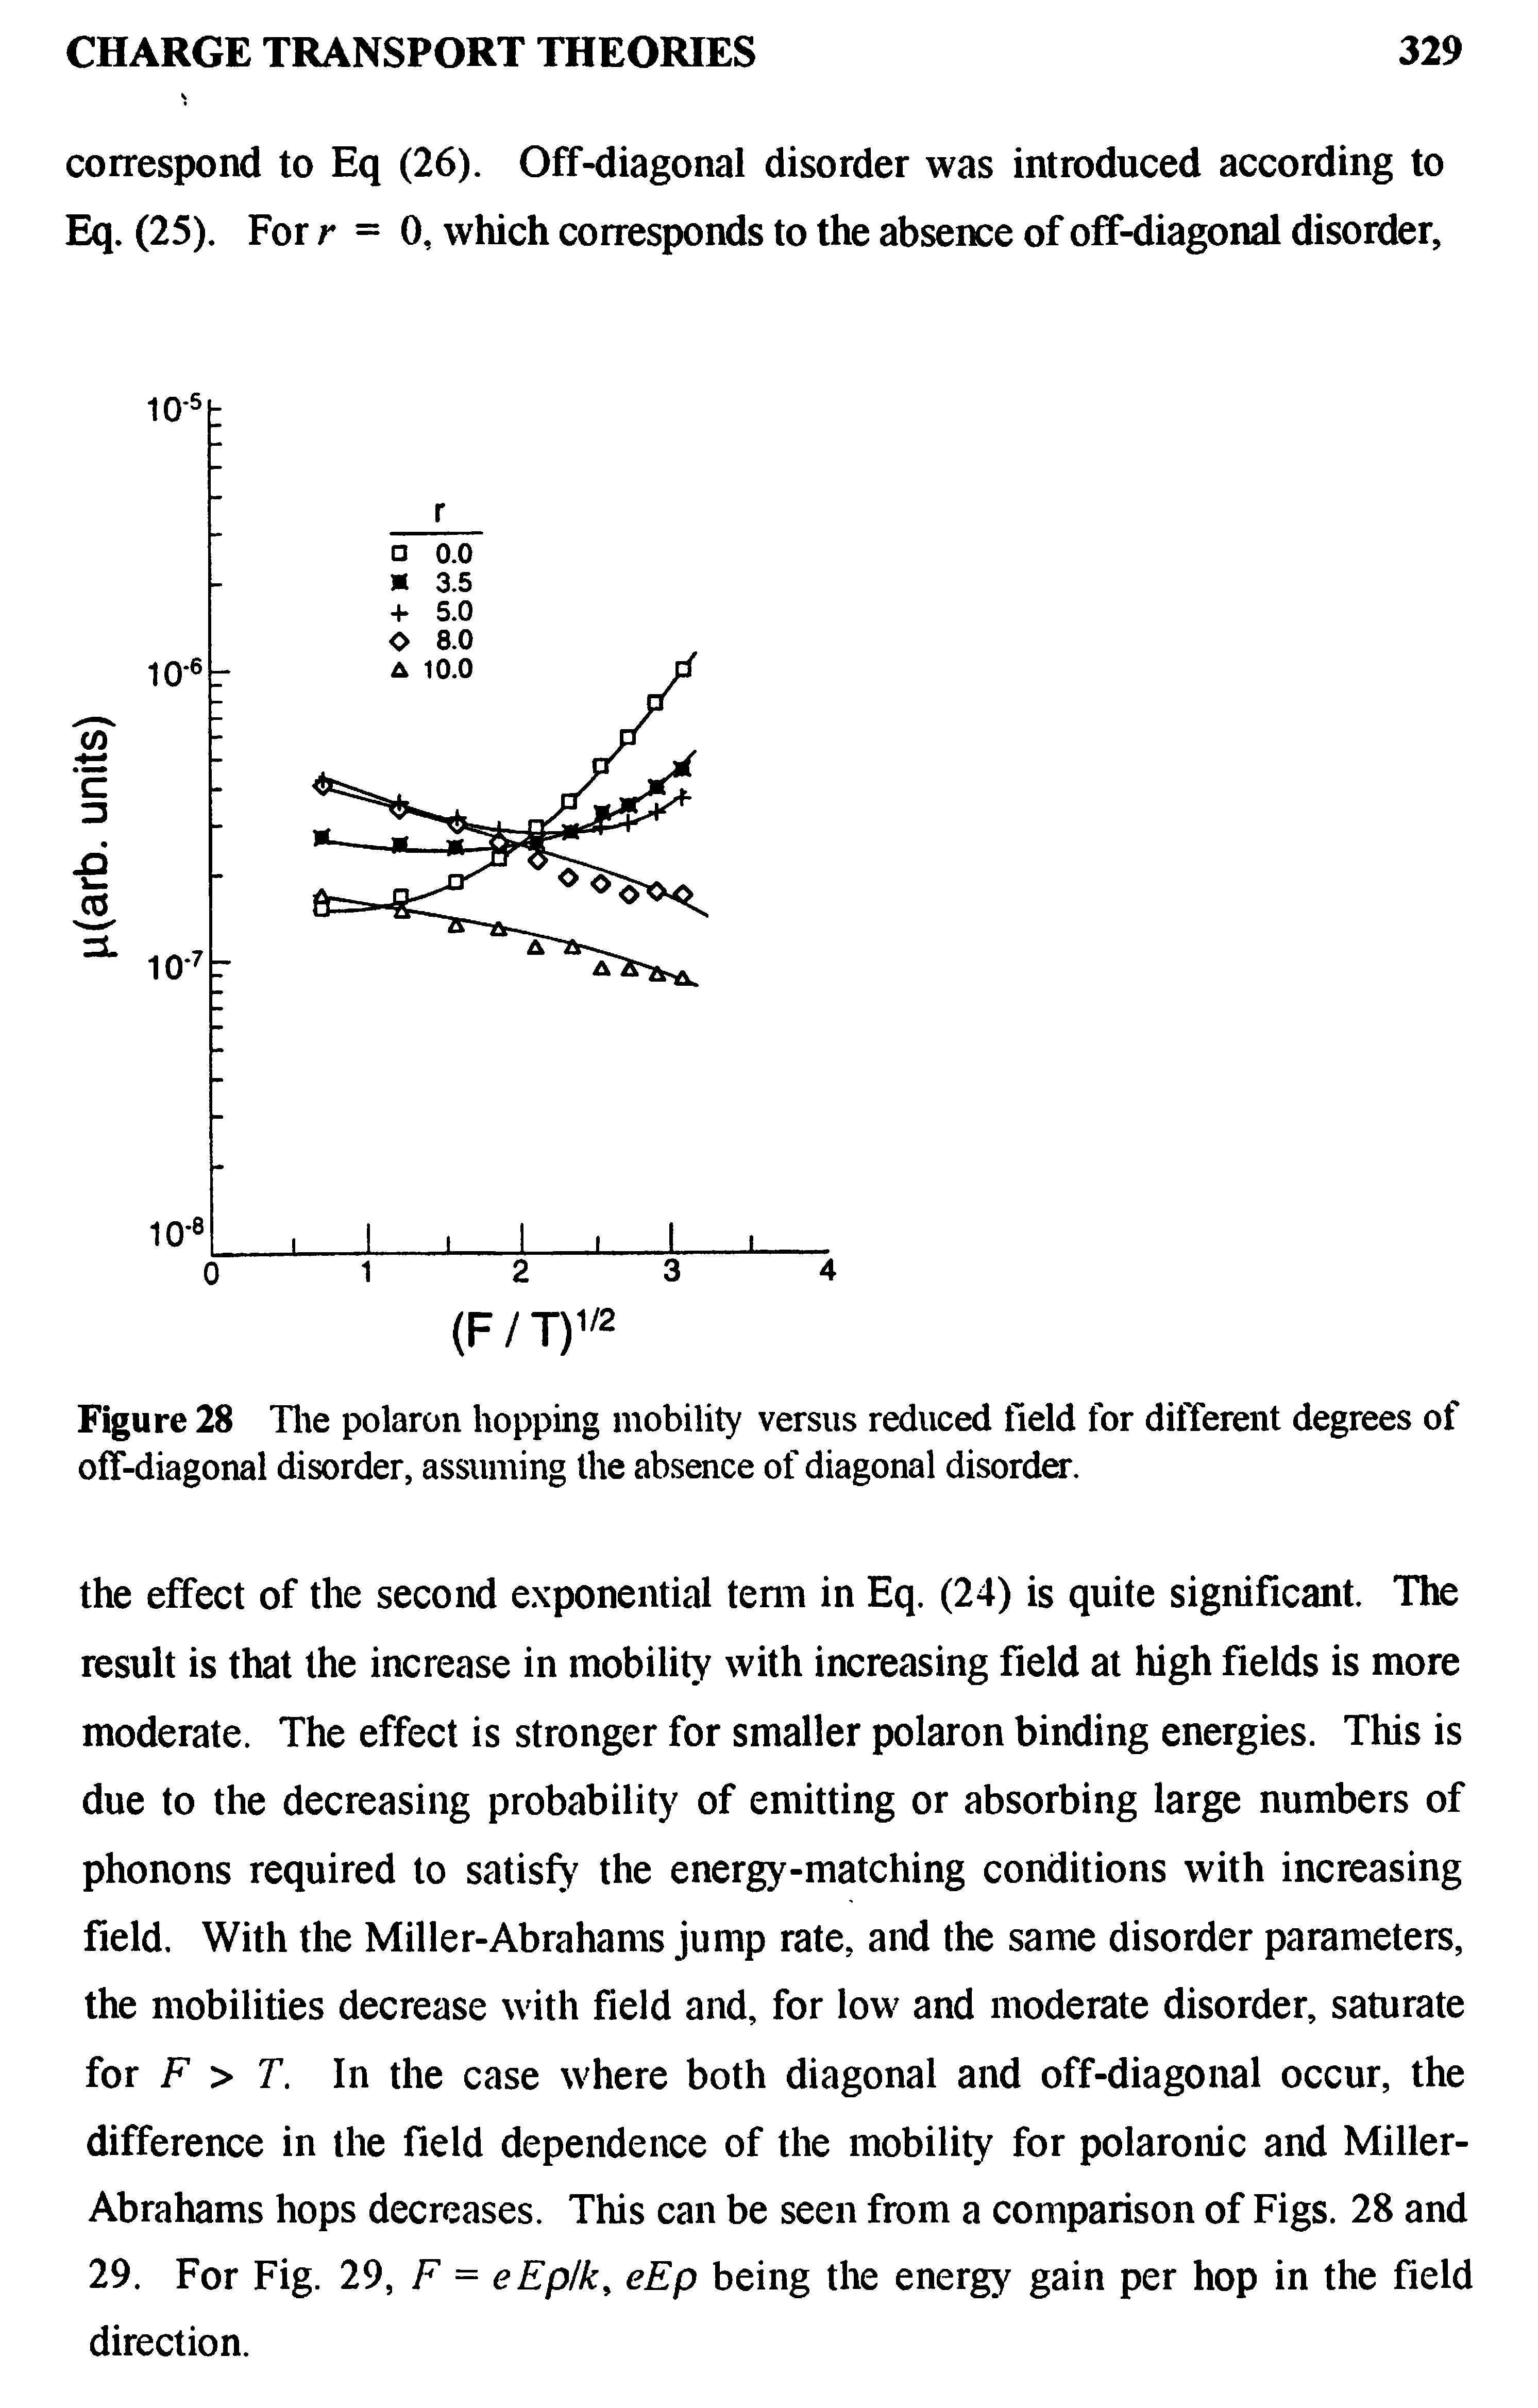 Figure 28 The polaron hopping mobility versus reduced field for different degrees of off-diagonal disorder, assuming the absence of diagonal disorder.